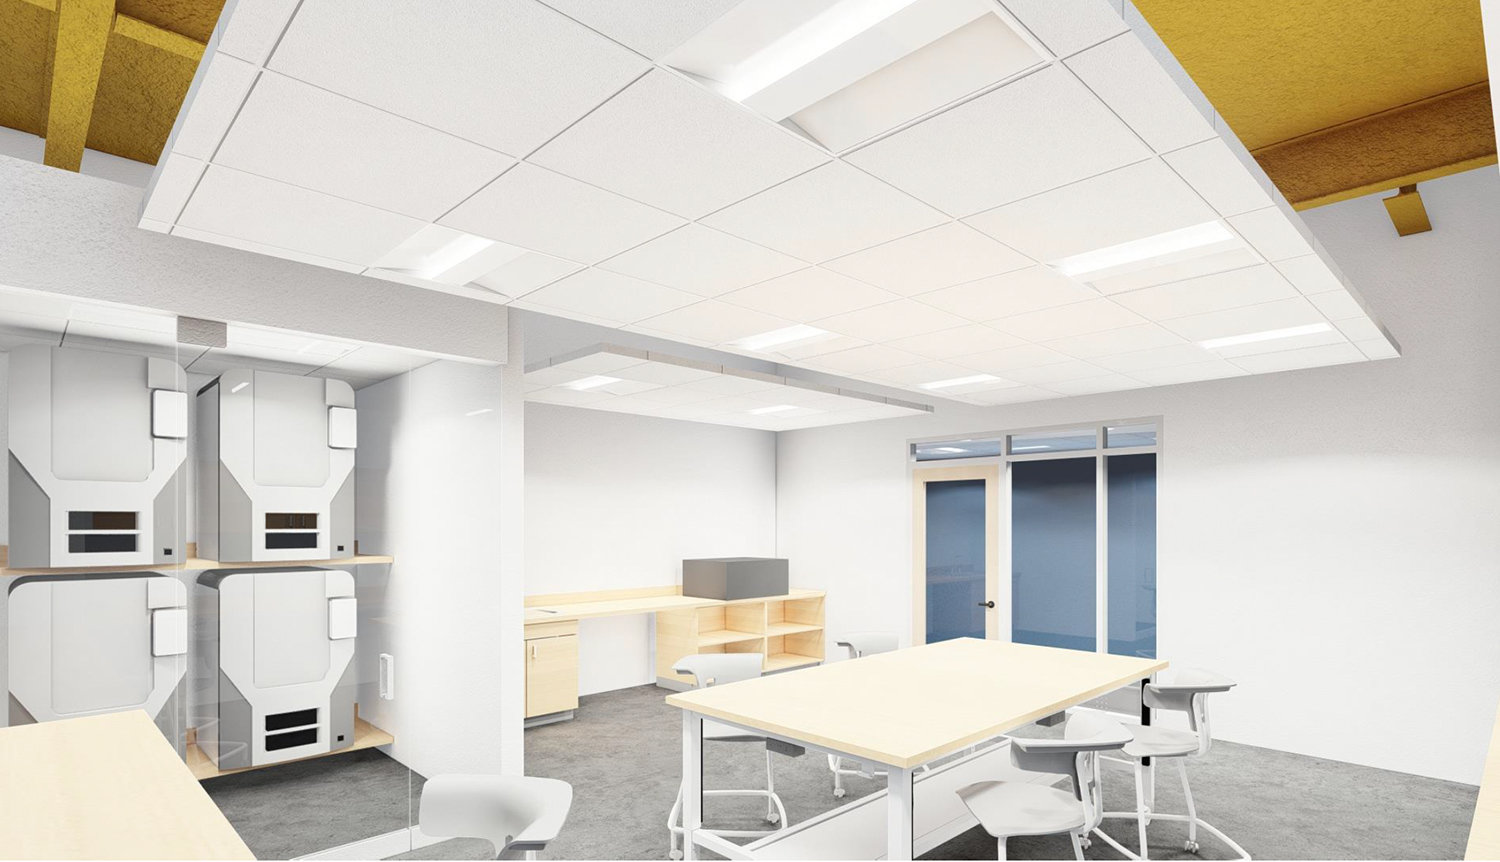 An engineered rendering of a work room containing a large tabletop and chairs, a sink, saw and several 3D printers.